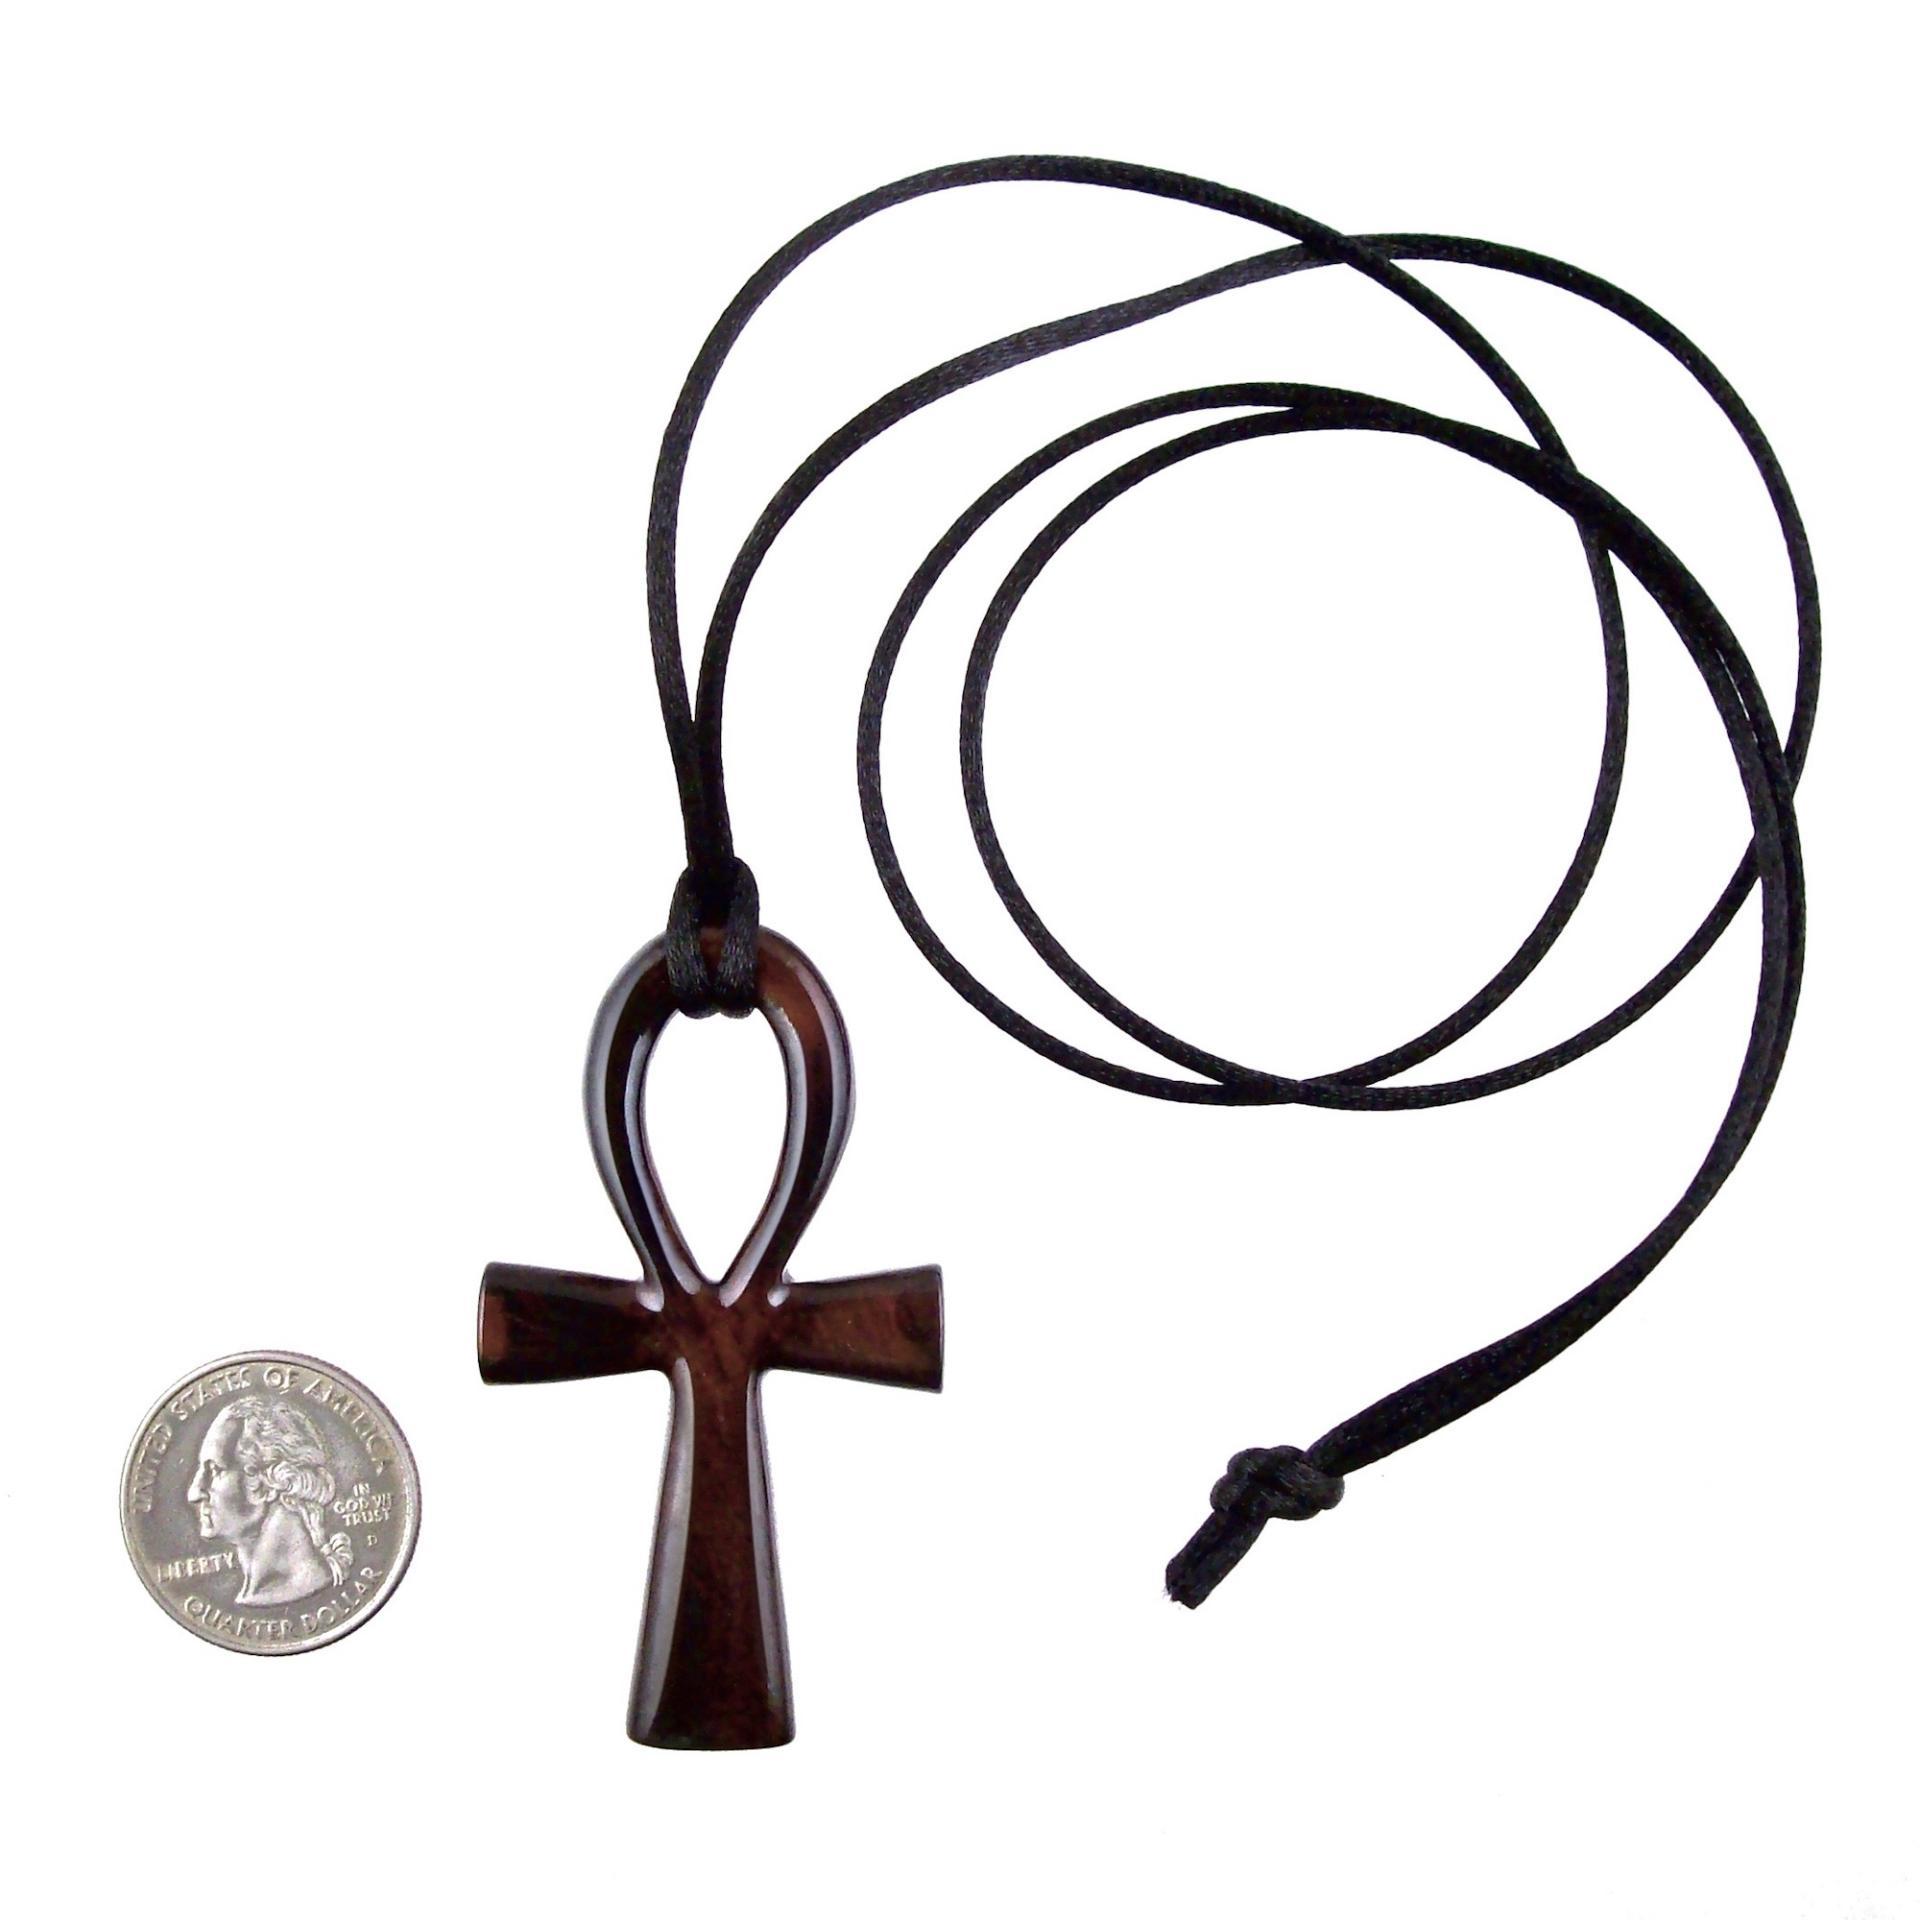 Large Ankh Pendant, Mens Wood Ankh Necklace, Wooden Egyptian Cross Ankh Pendant, African Jewelry